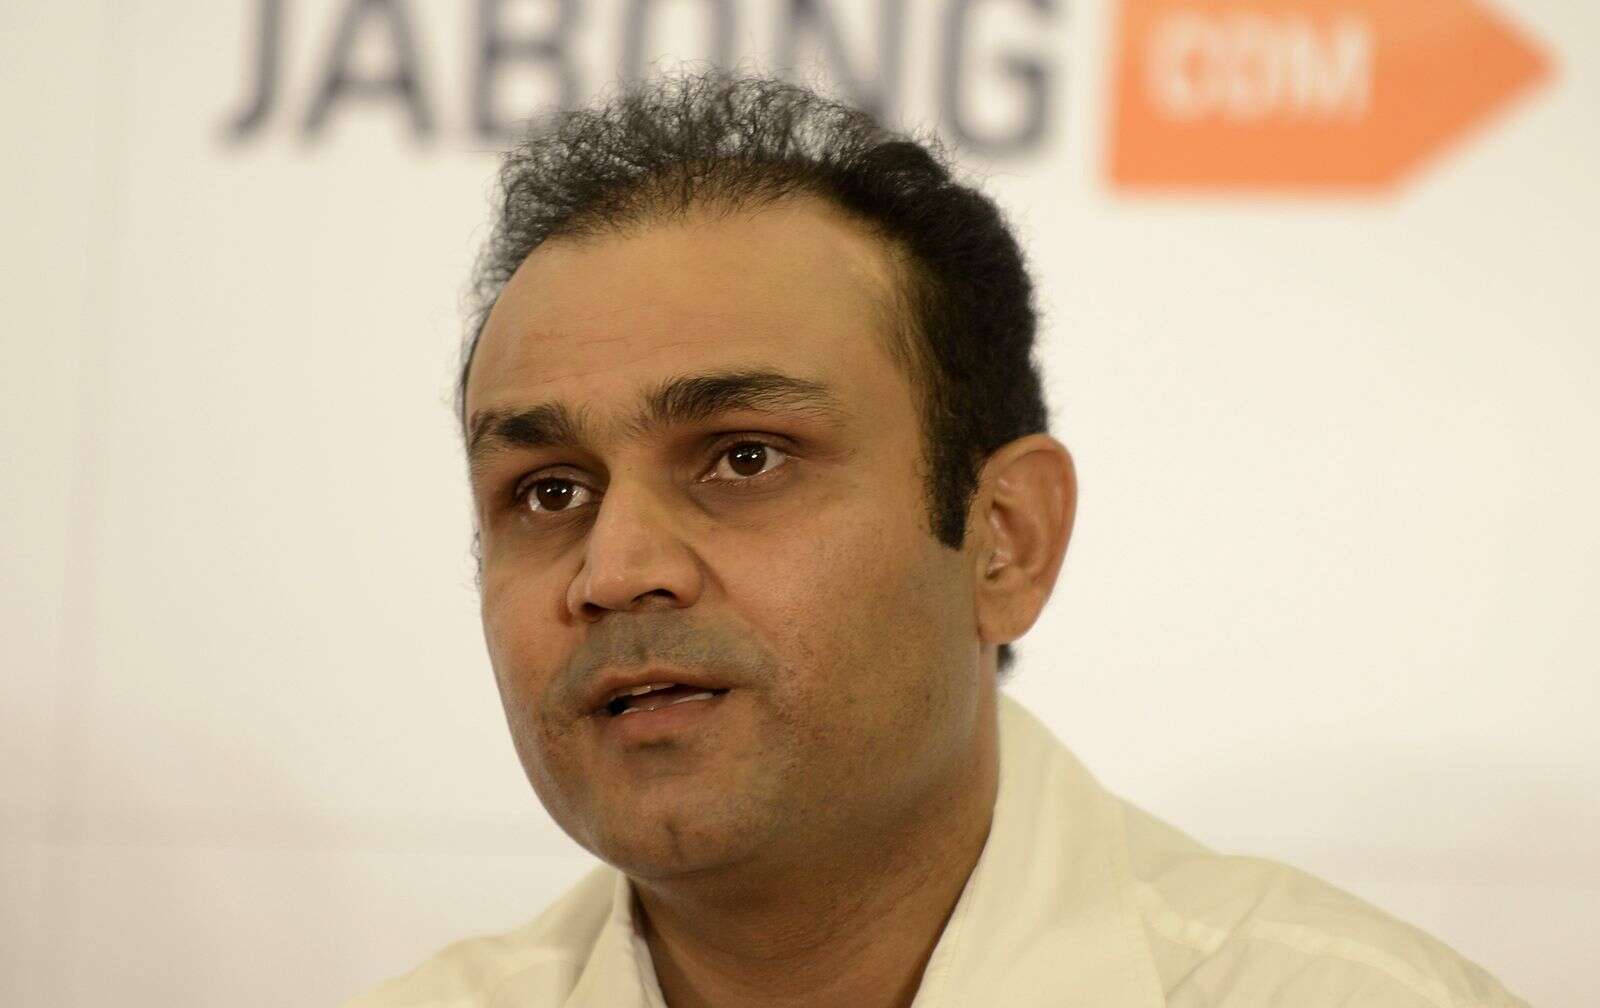 virender sehwag offers free education for children of india's train crash victims